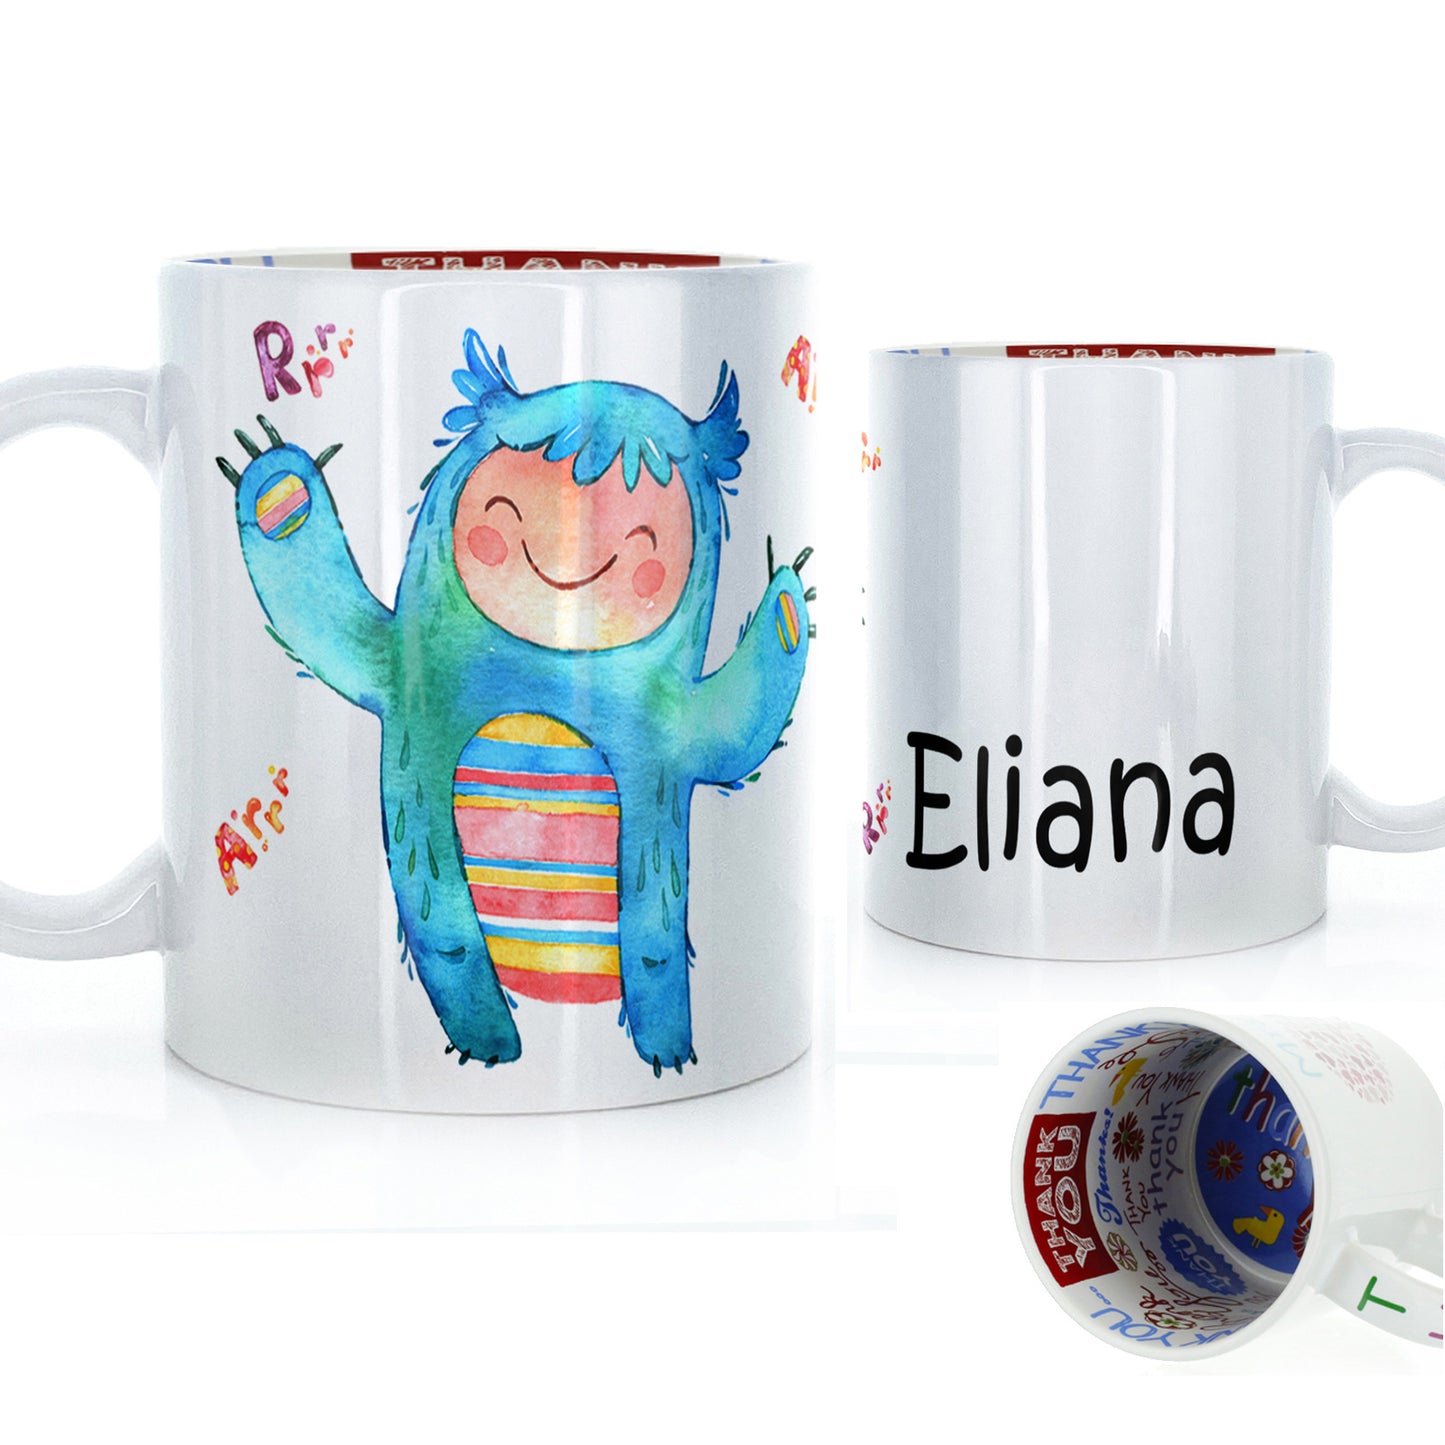 Personalised Mug with Childish Text and Furry Growling Blue Monster